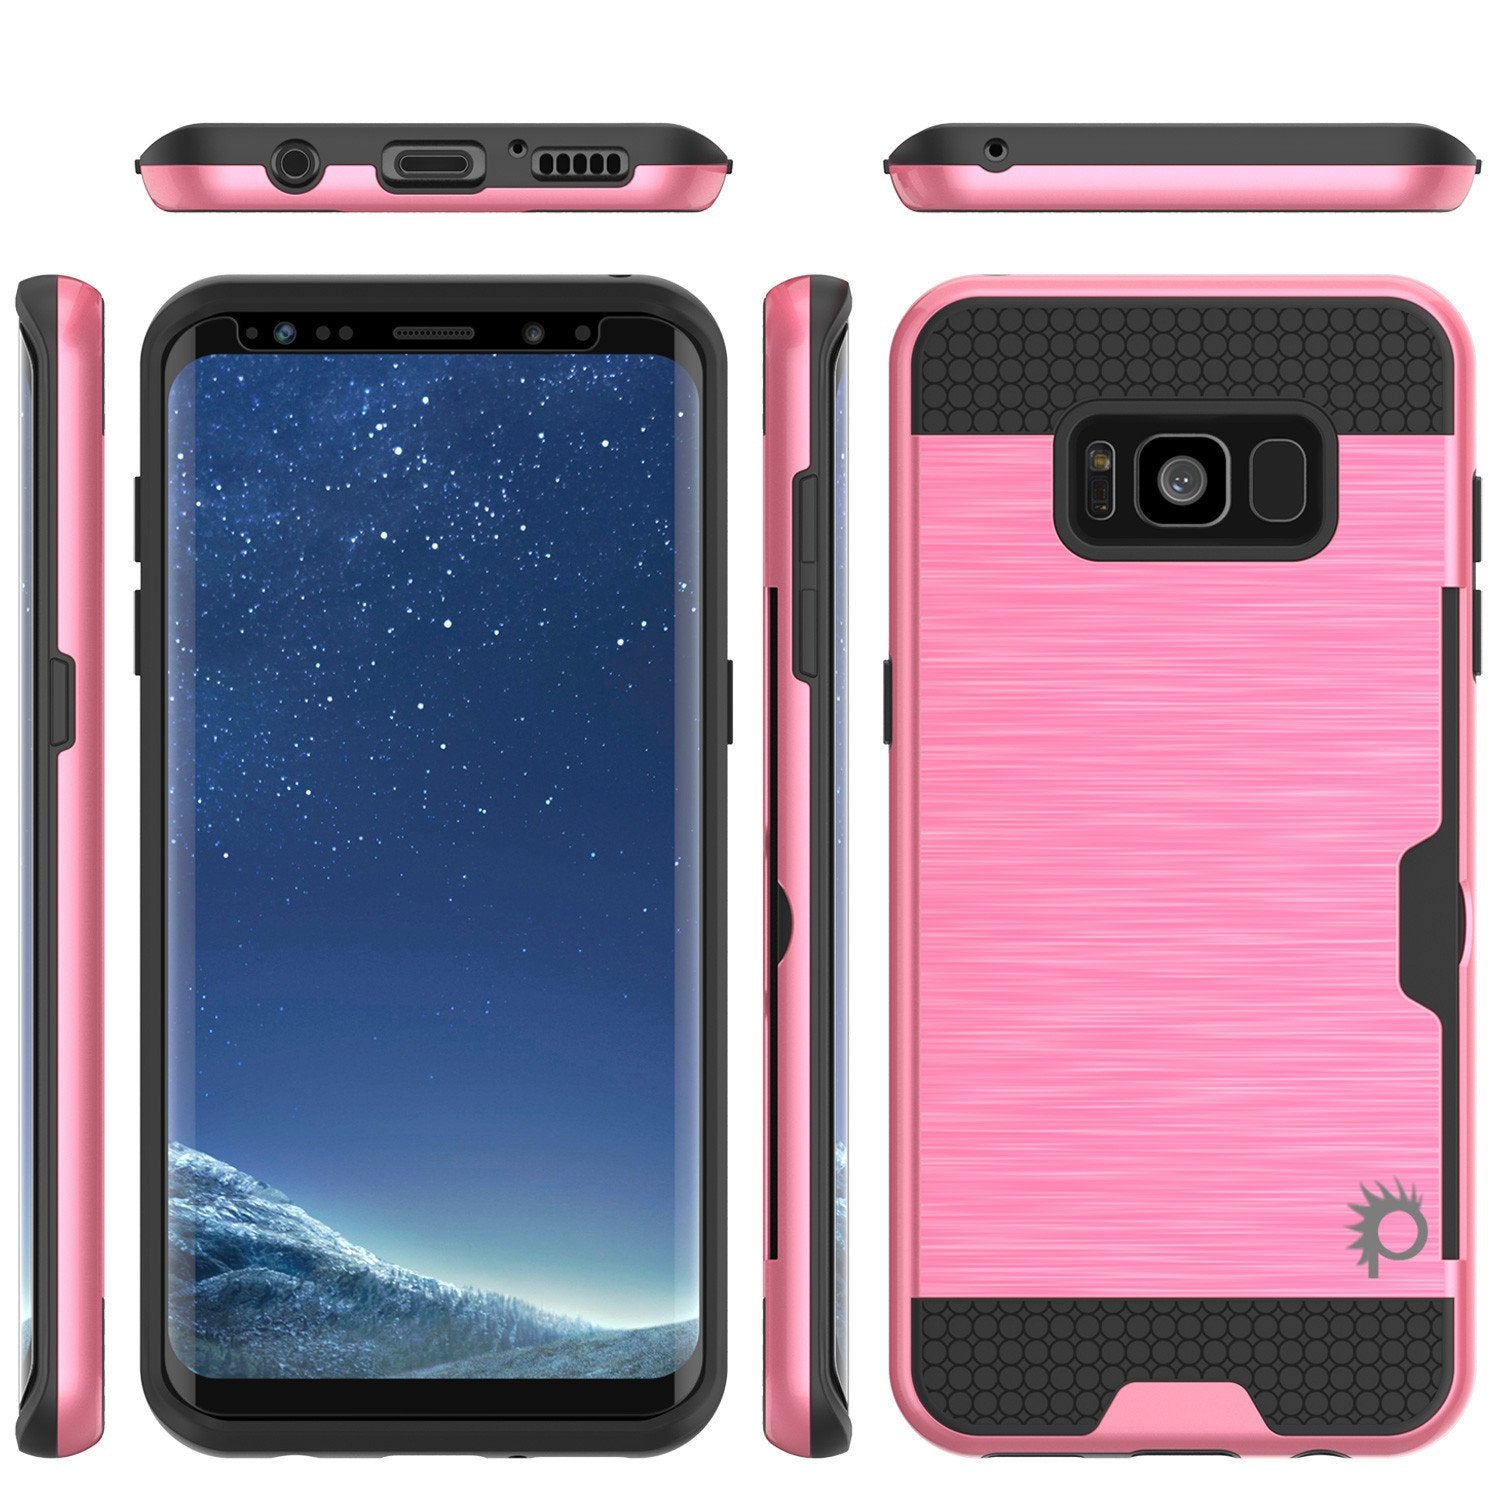 Galaxy S8 Plus Punkcase SLOT Series Dual-Layer Armor Cover, Pink